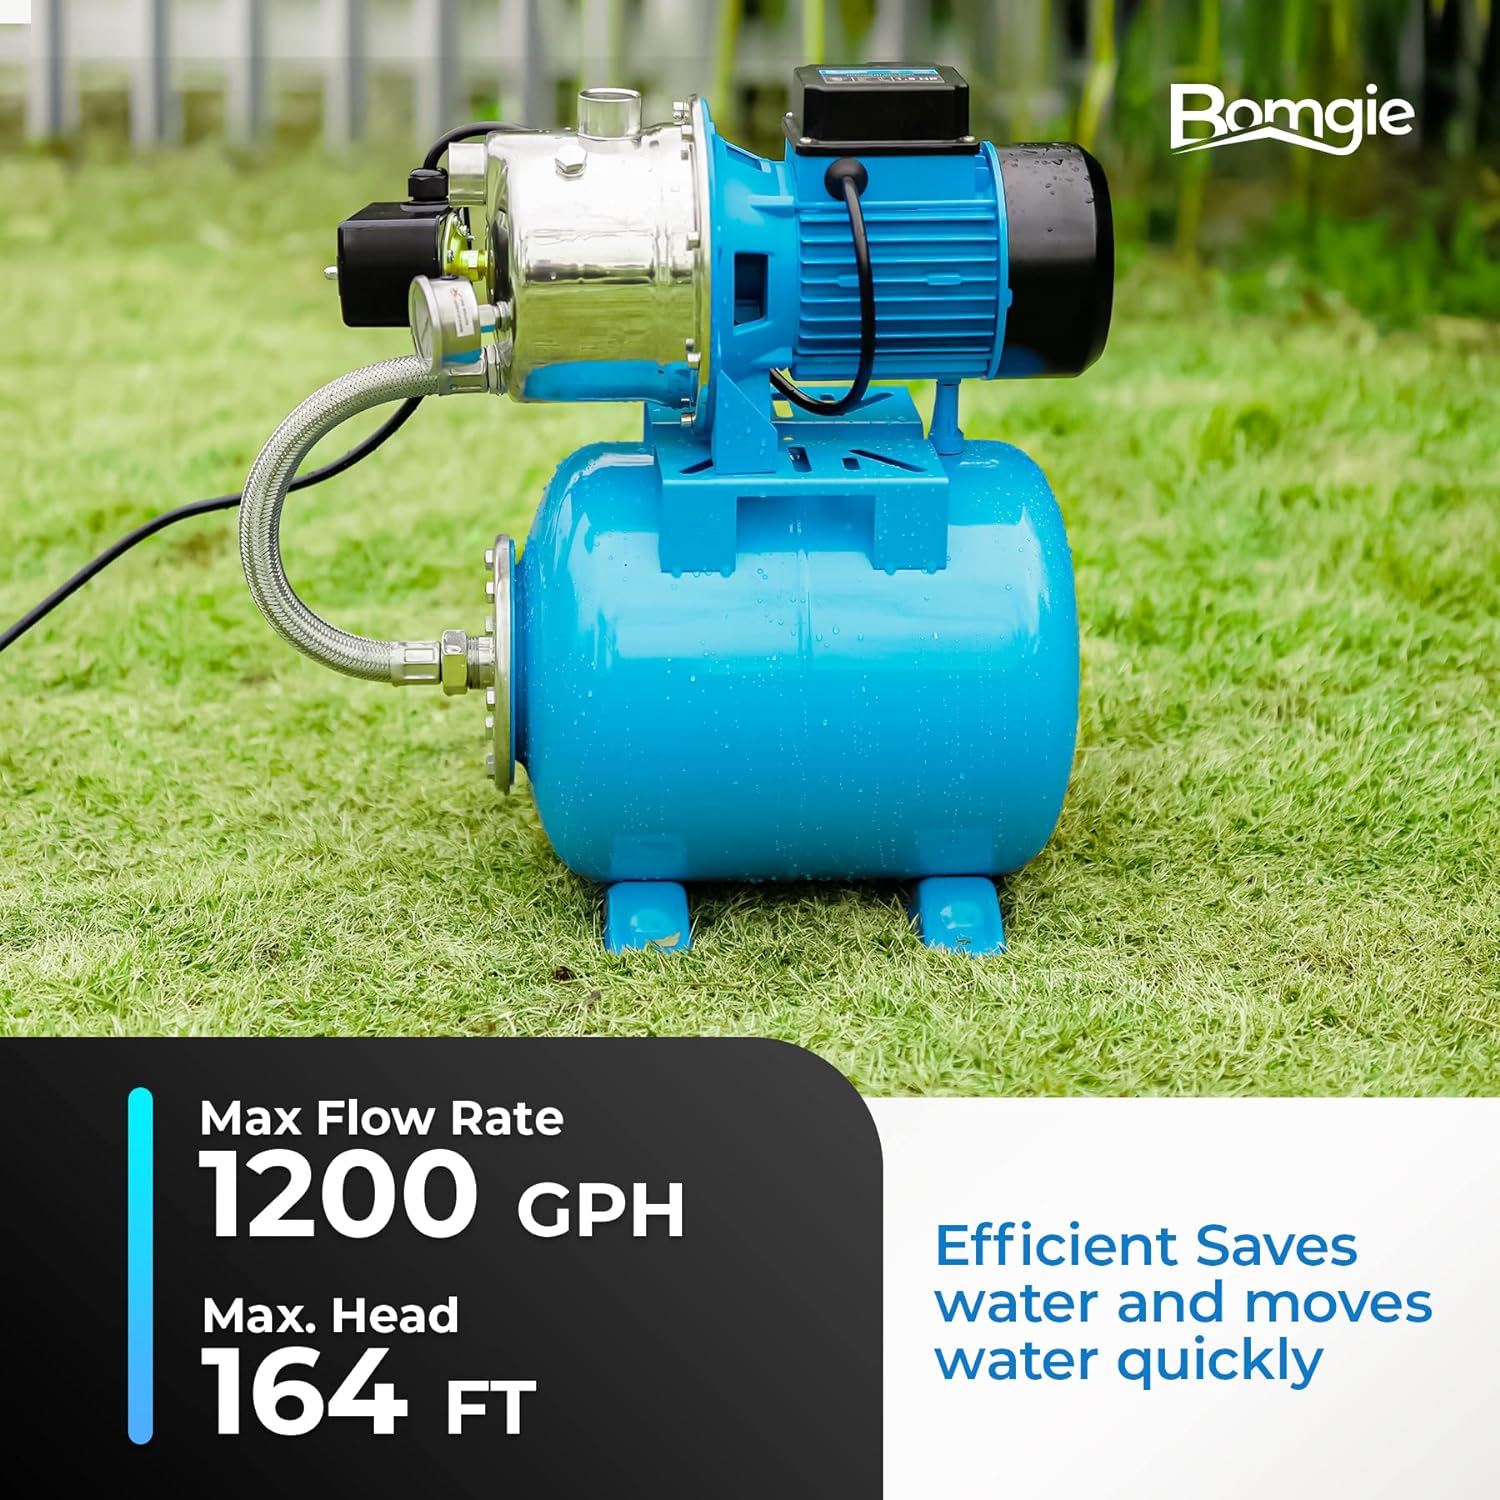 BOMGIE 1.5HP Shallow Well Pump with NSF Certification Pressure Tank for Drinking Water Safety,1200GPH Stainless Steel Irrigation Jet Water Transfer Pumps Automatic Booster Sprinkler System